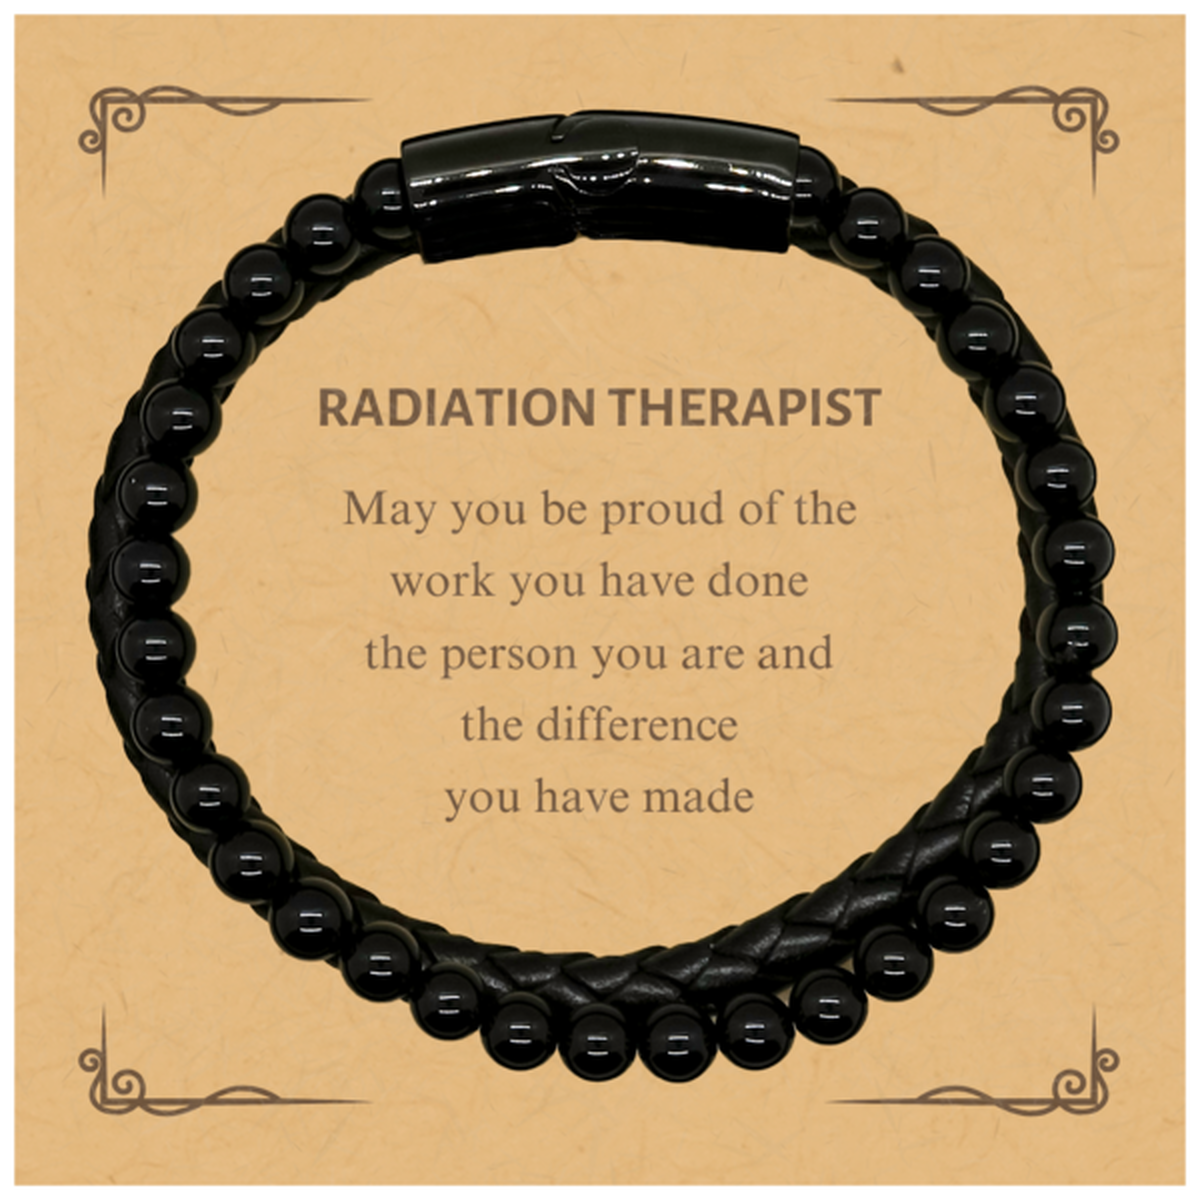 Radiation Therapist May you be proud of the work you have done, Retirement Radiation Therapist Stone Leather Bracelets for Colleague Appreciation Gifts Amazing for Radiation Therapist